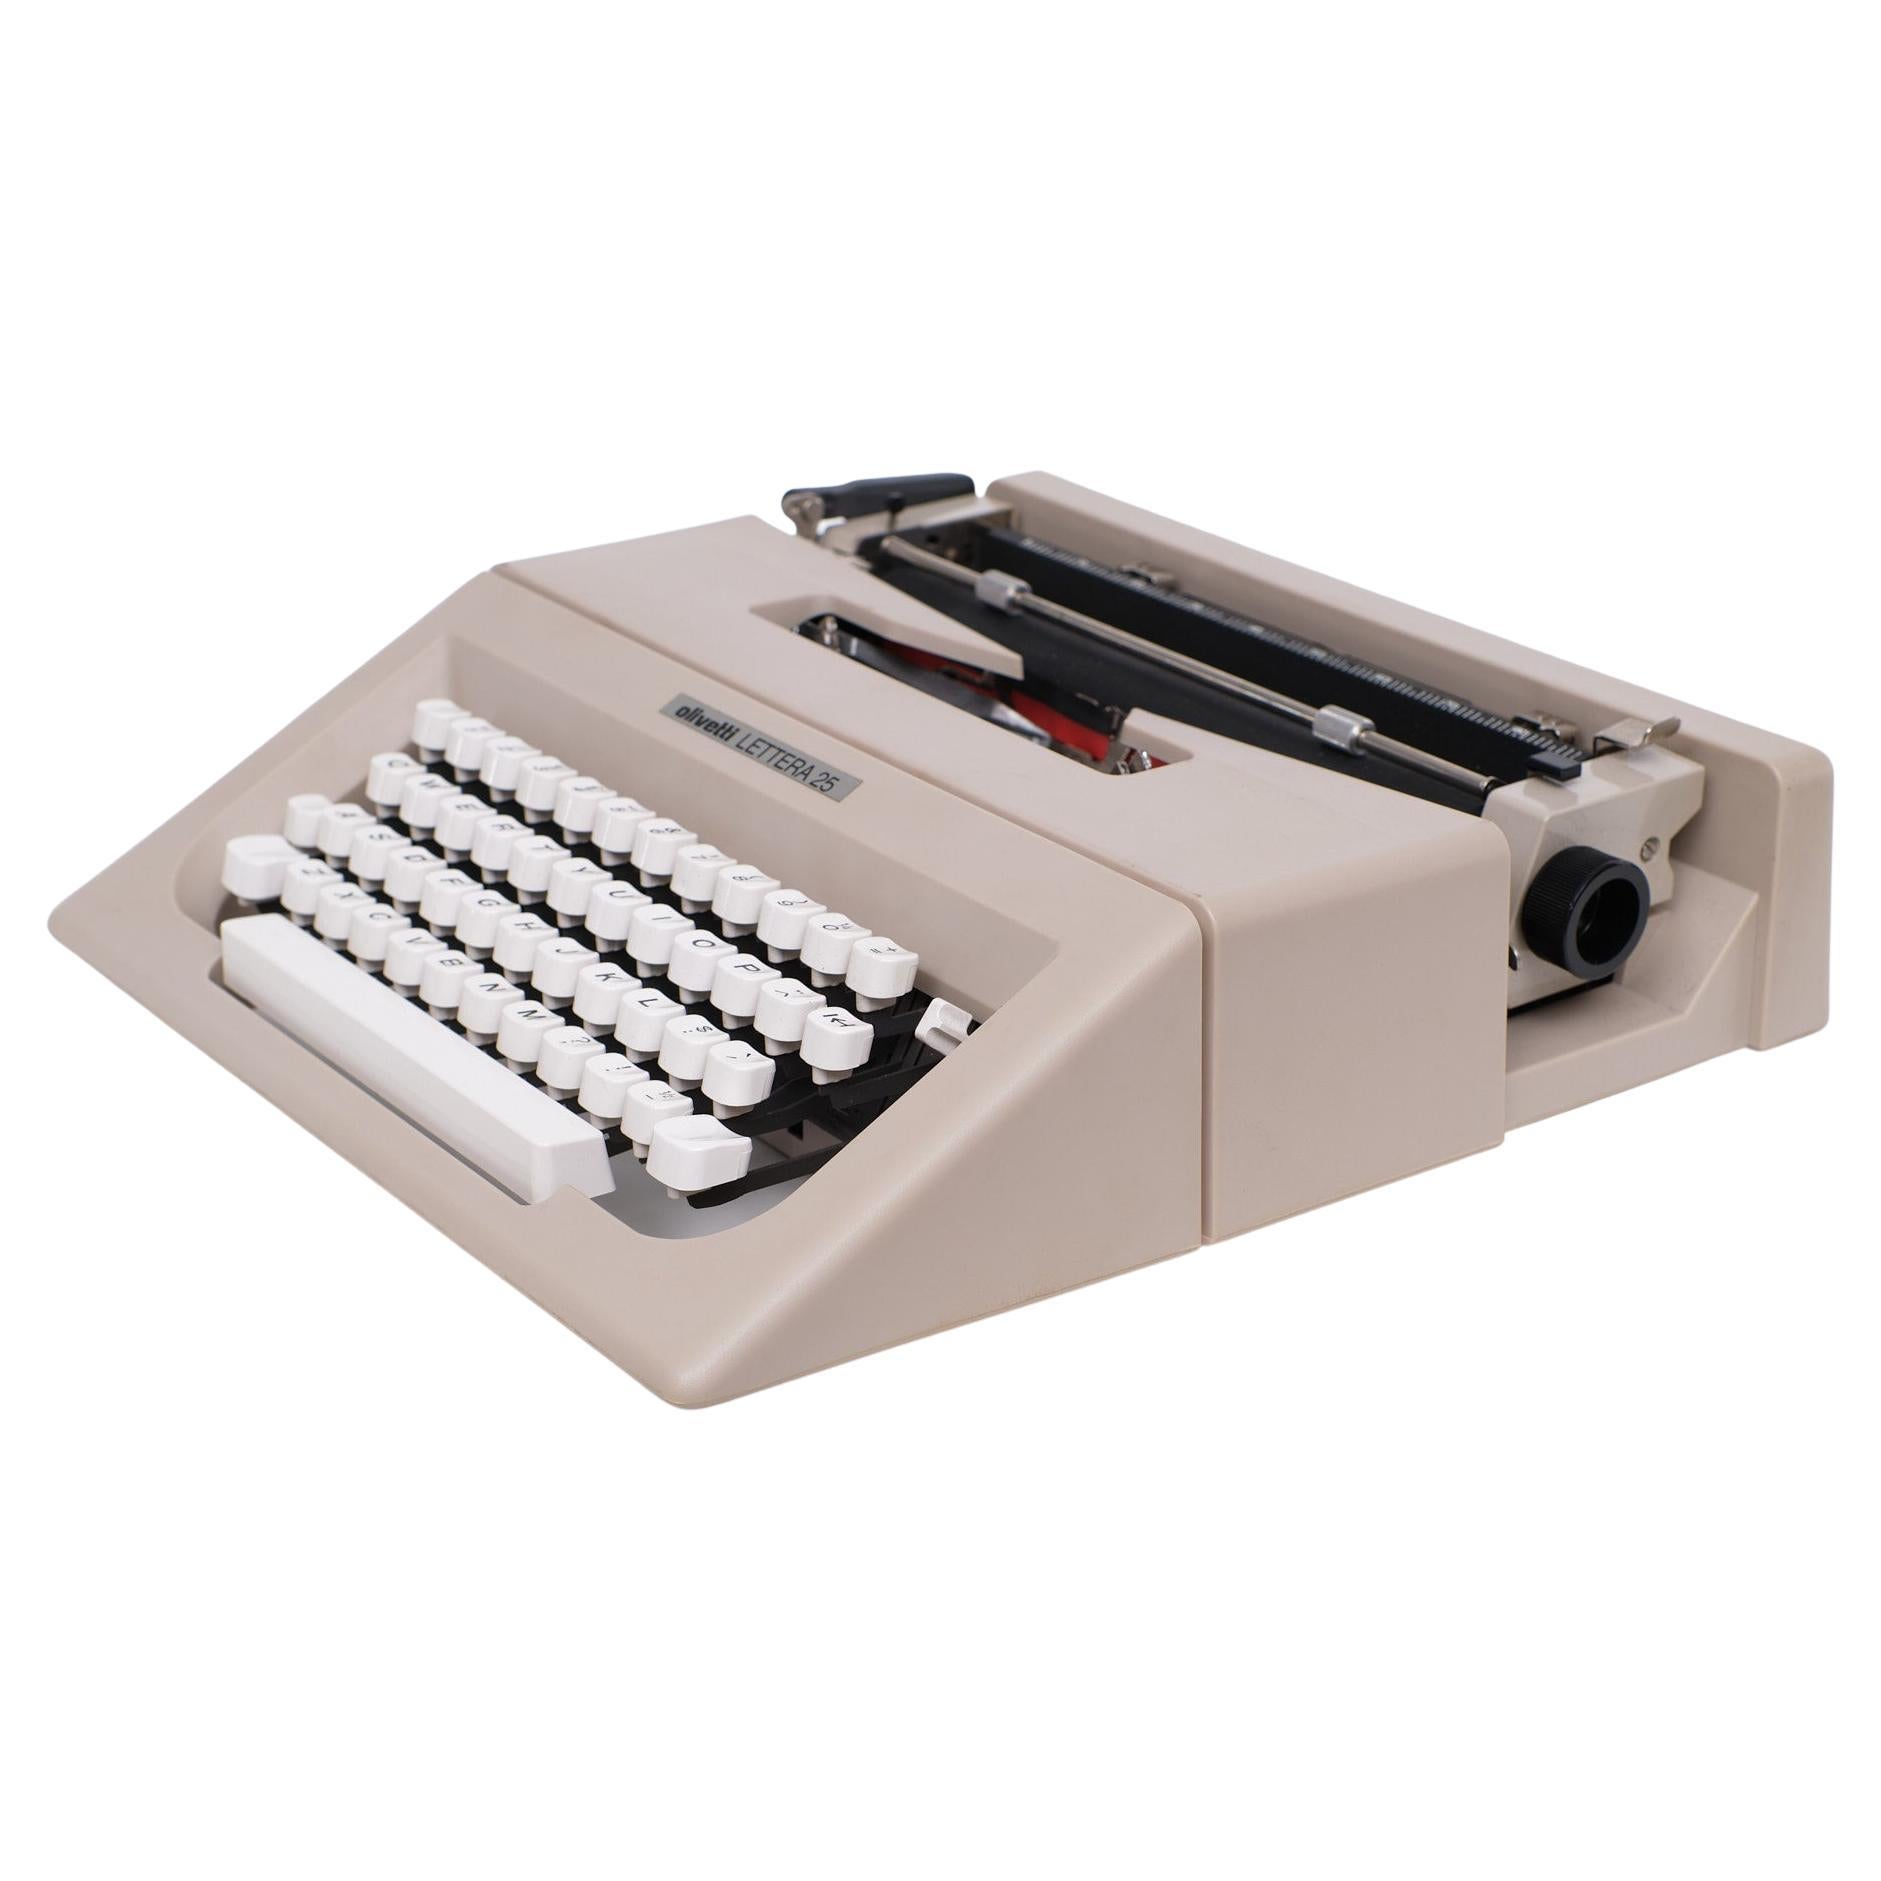 Olivetti Lettura 25 typewriter very nice sleek portable typewriter. 
Comes in a Faux leather case. Made in Spain. Good clean condition.
Works perfect. Some wear at the case.